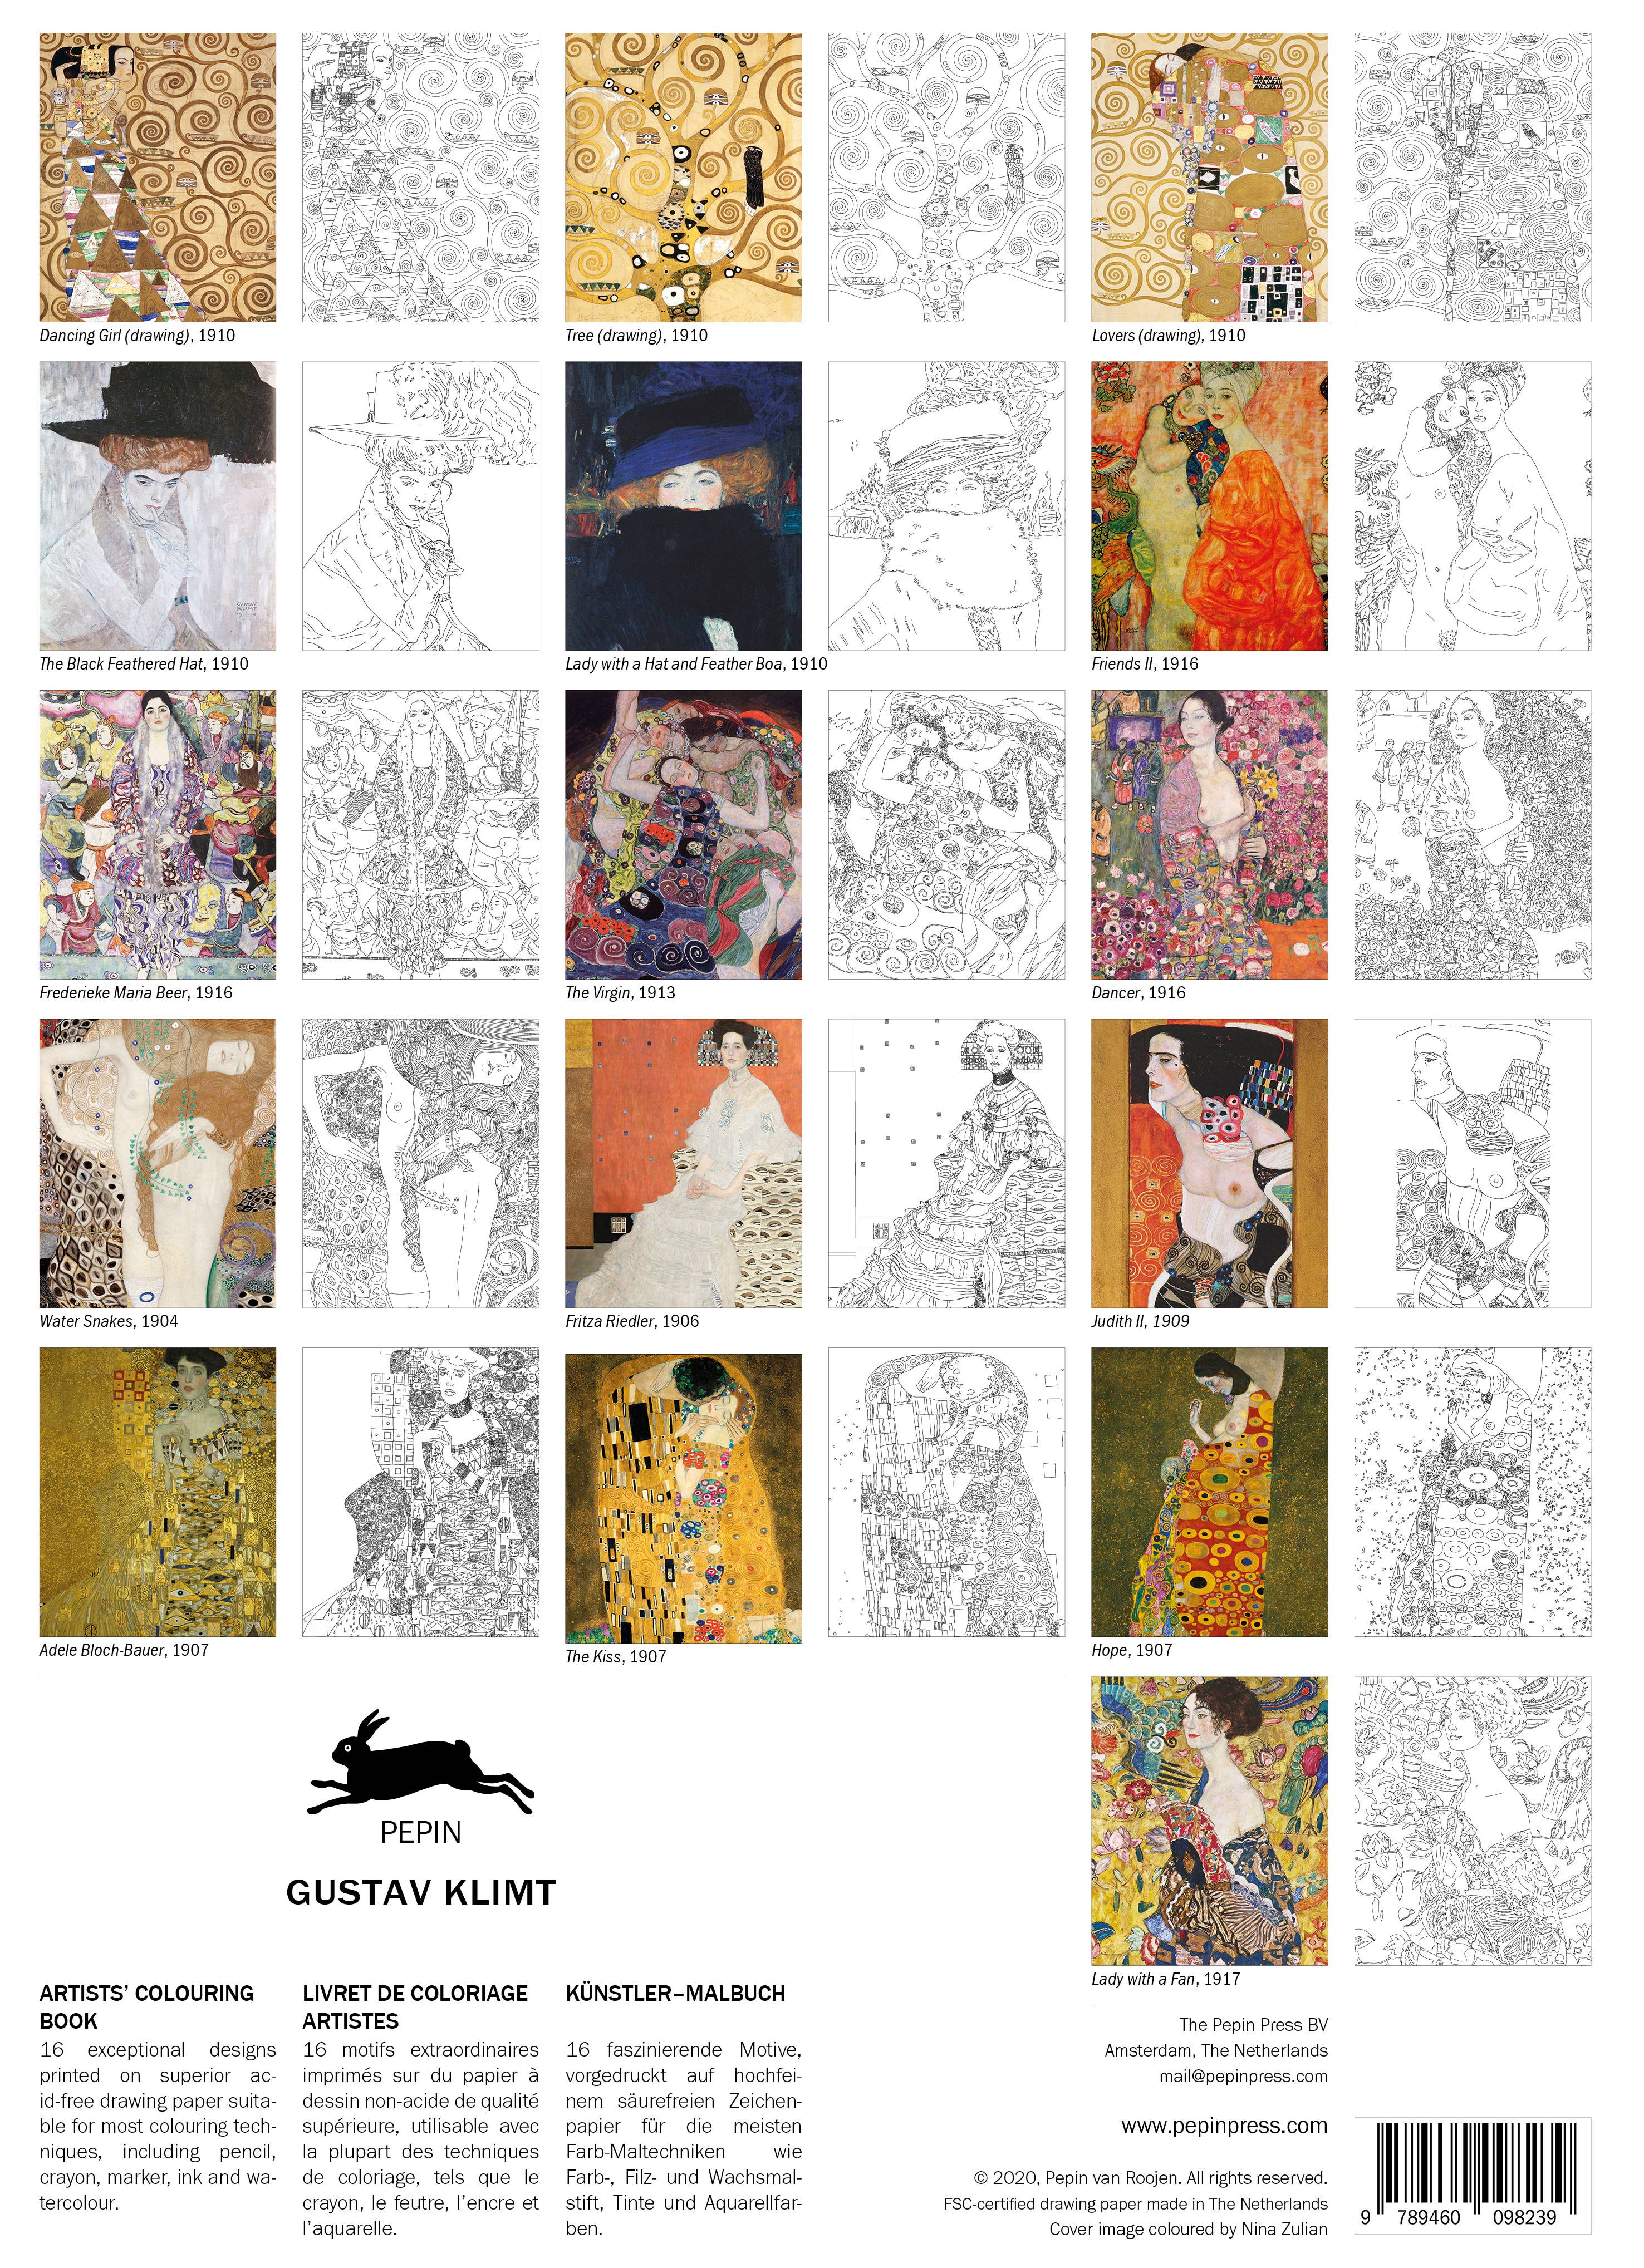 Golden Reveries: A Gustav Klimt Inspired 16 Page Professional Colouring Experience